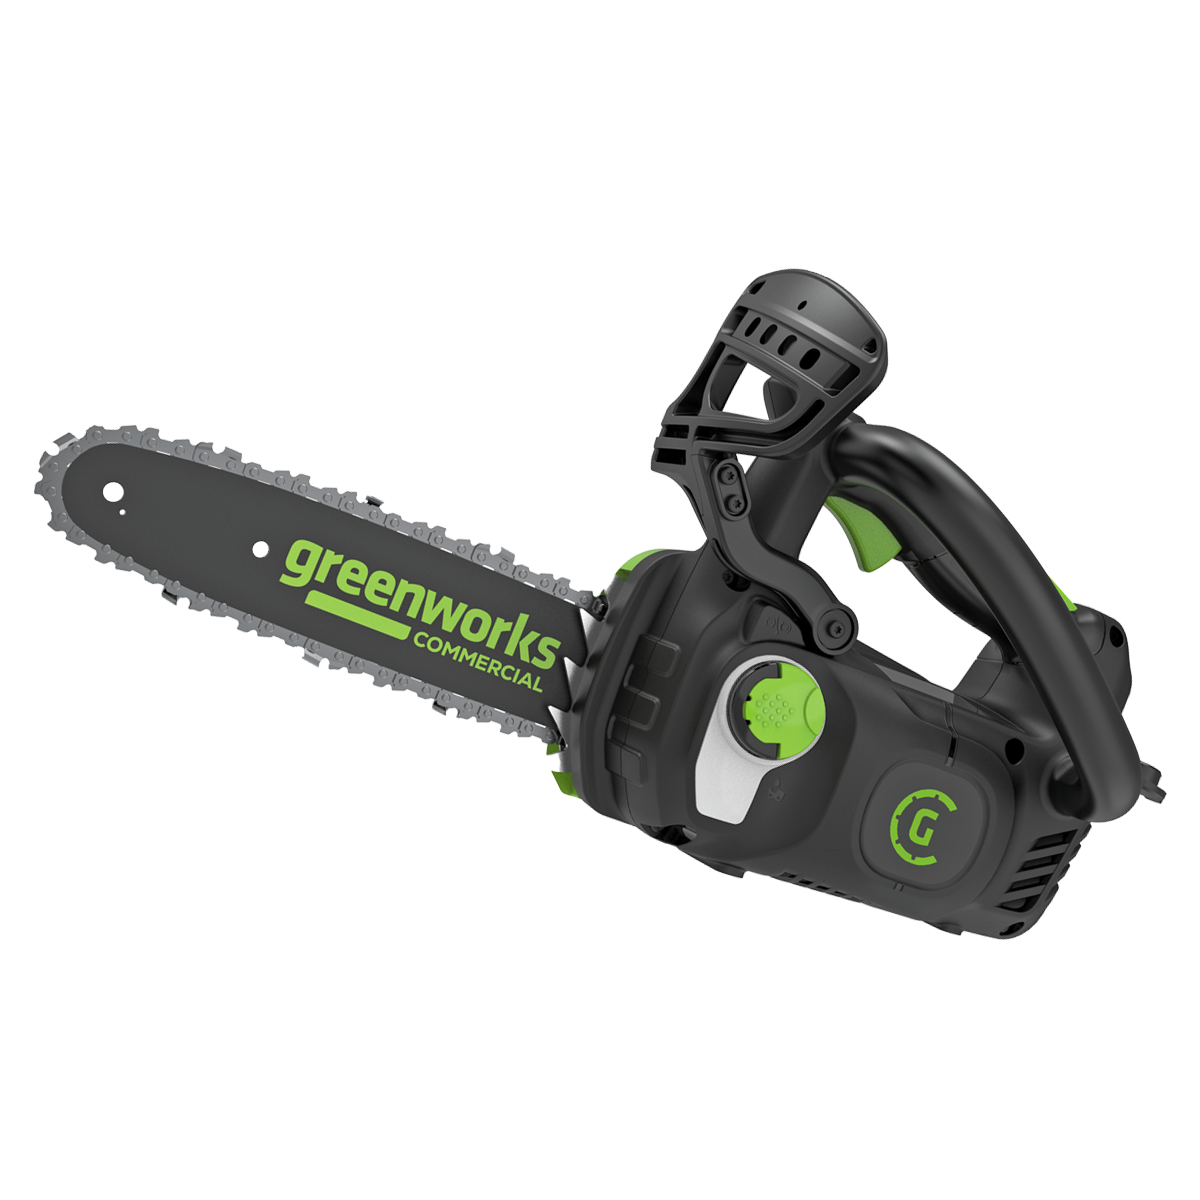 Greenworks 82V - 1.5kW Top Handle Chainsaw